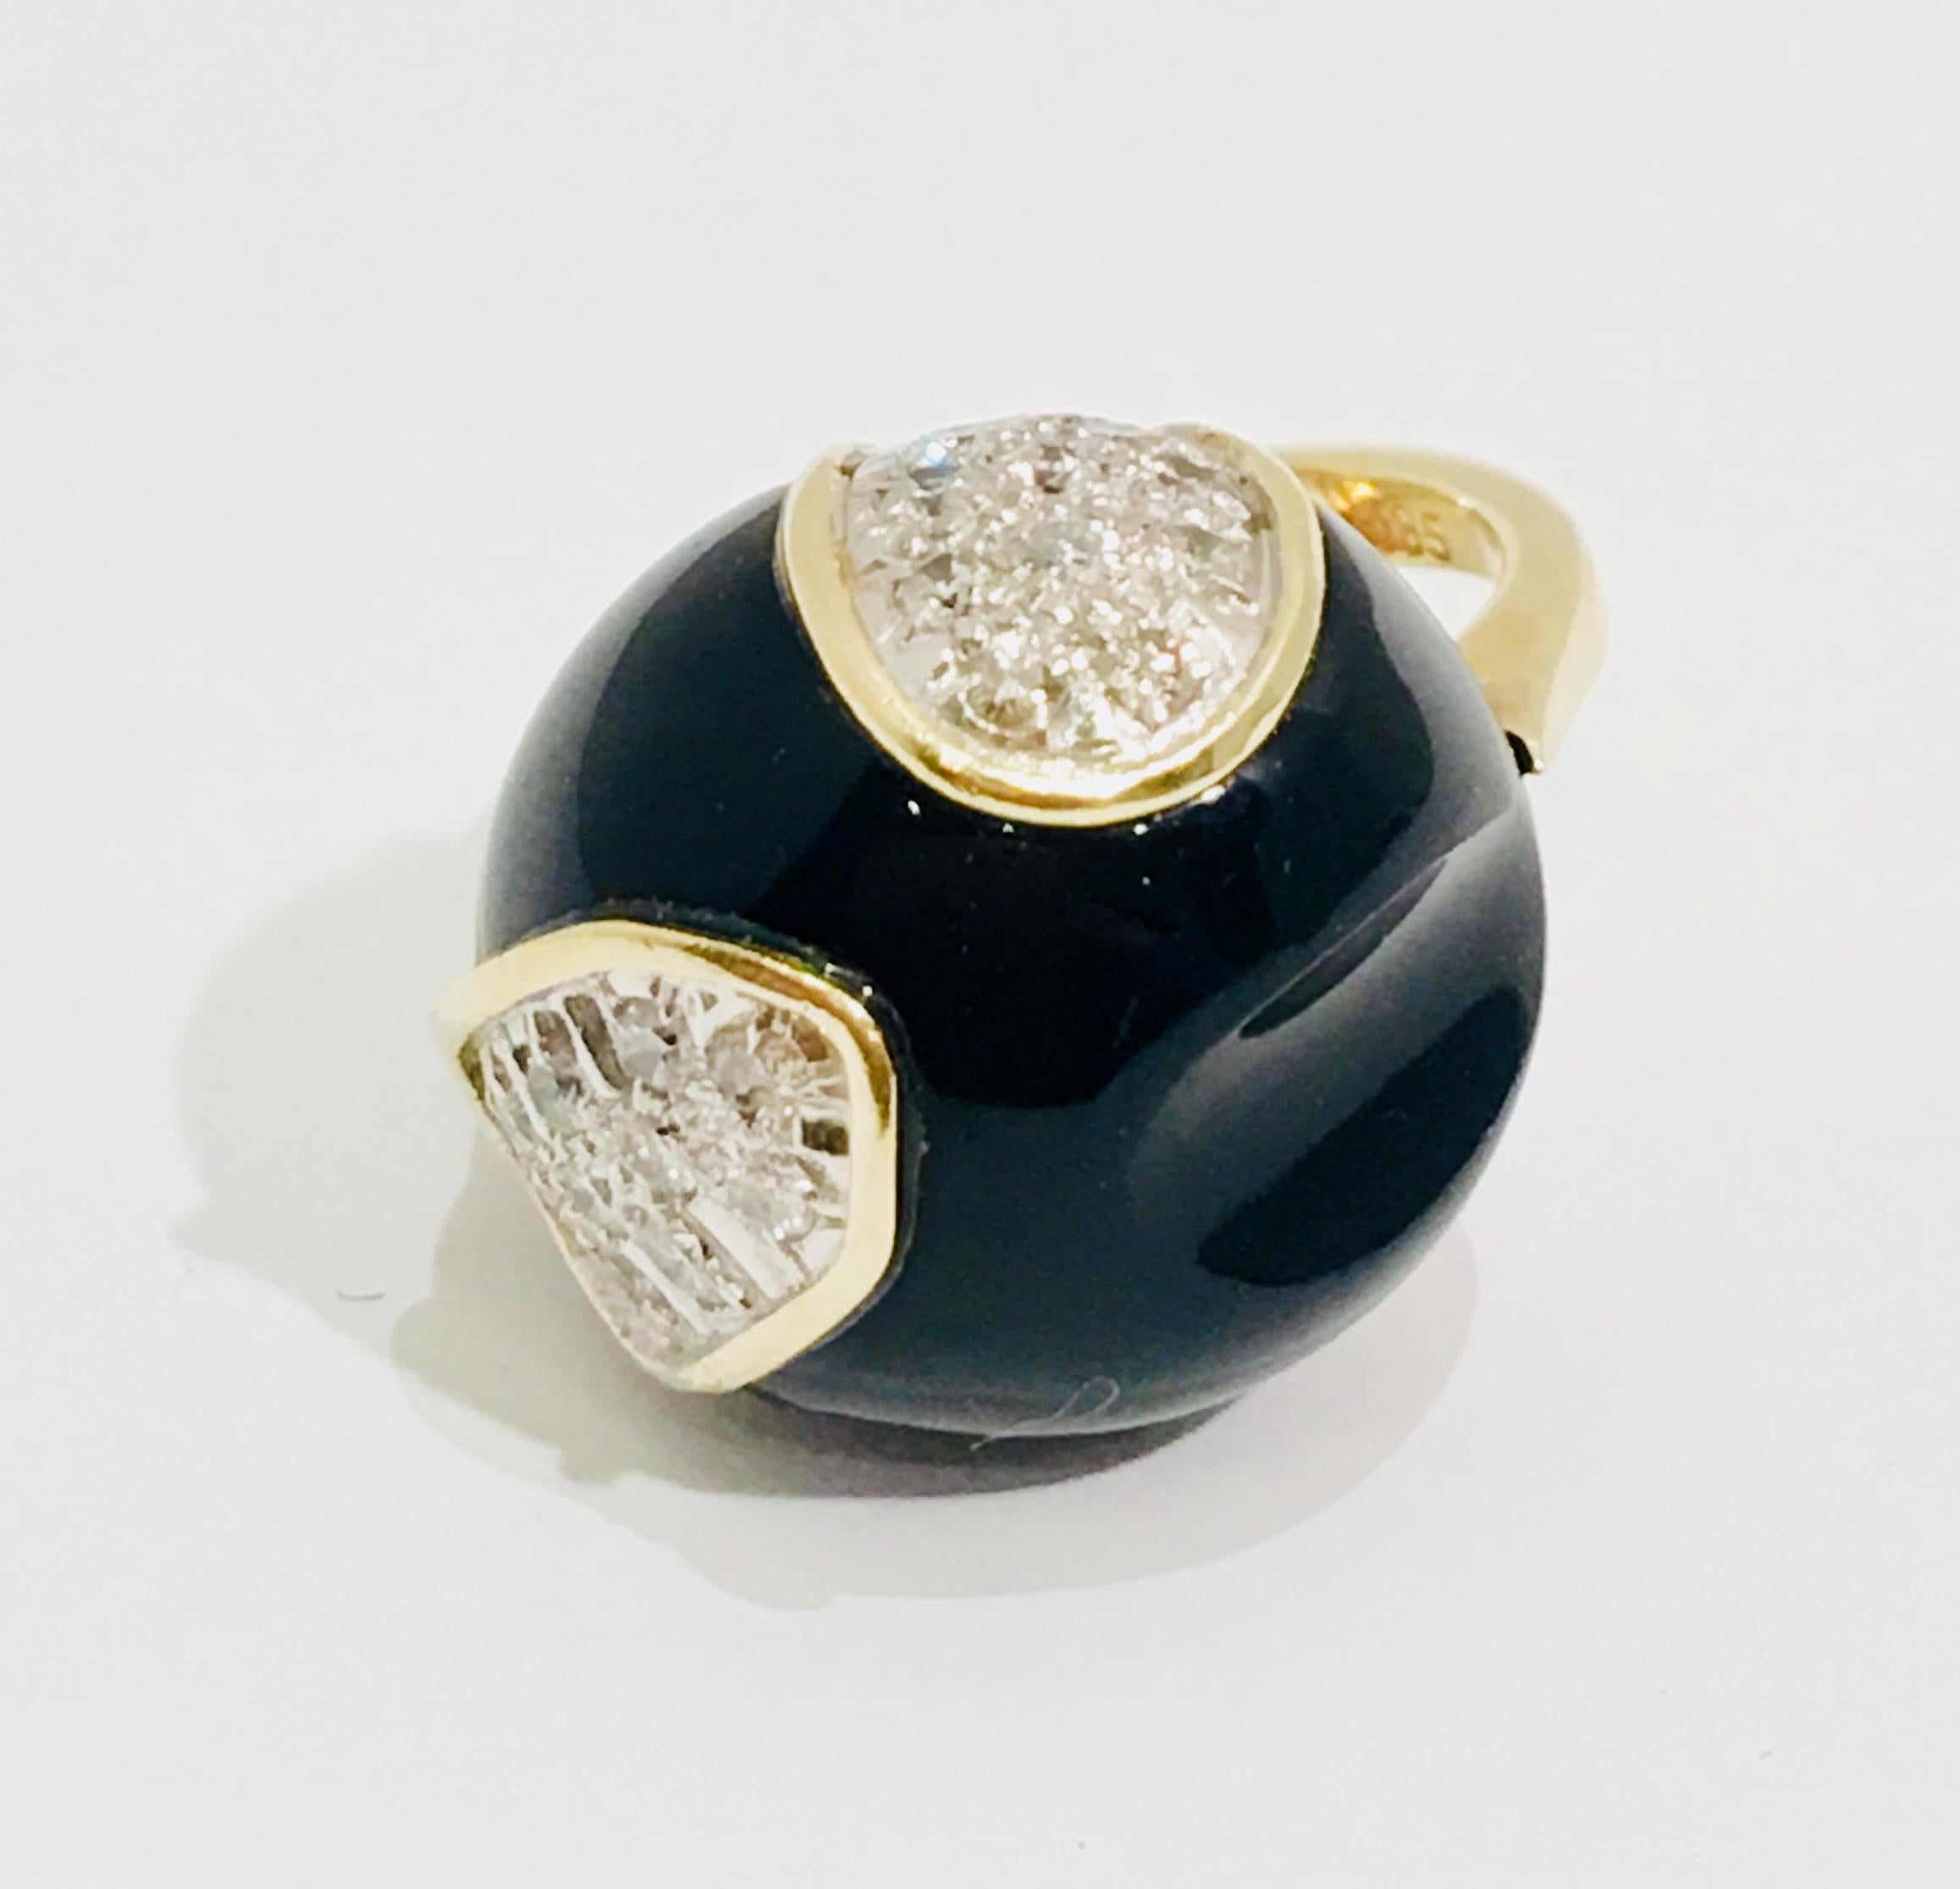 14 karat yellow gold ring from the 1960s features a bold, asymmetrically carved black onyx ball with 2 free form insets of brutalist textured 14 karat white gold and diamond pave rimmed in yellow gold.

20 round brilliant diamonds measure 2 mm in